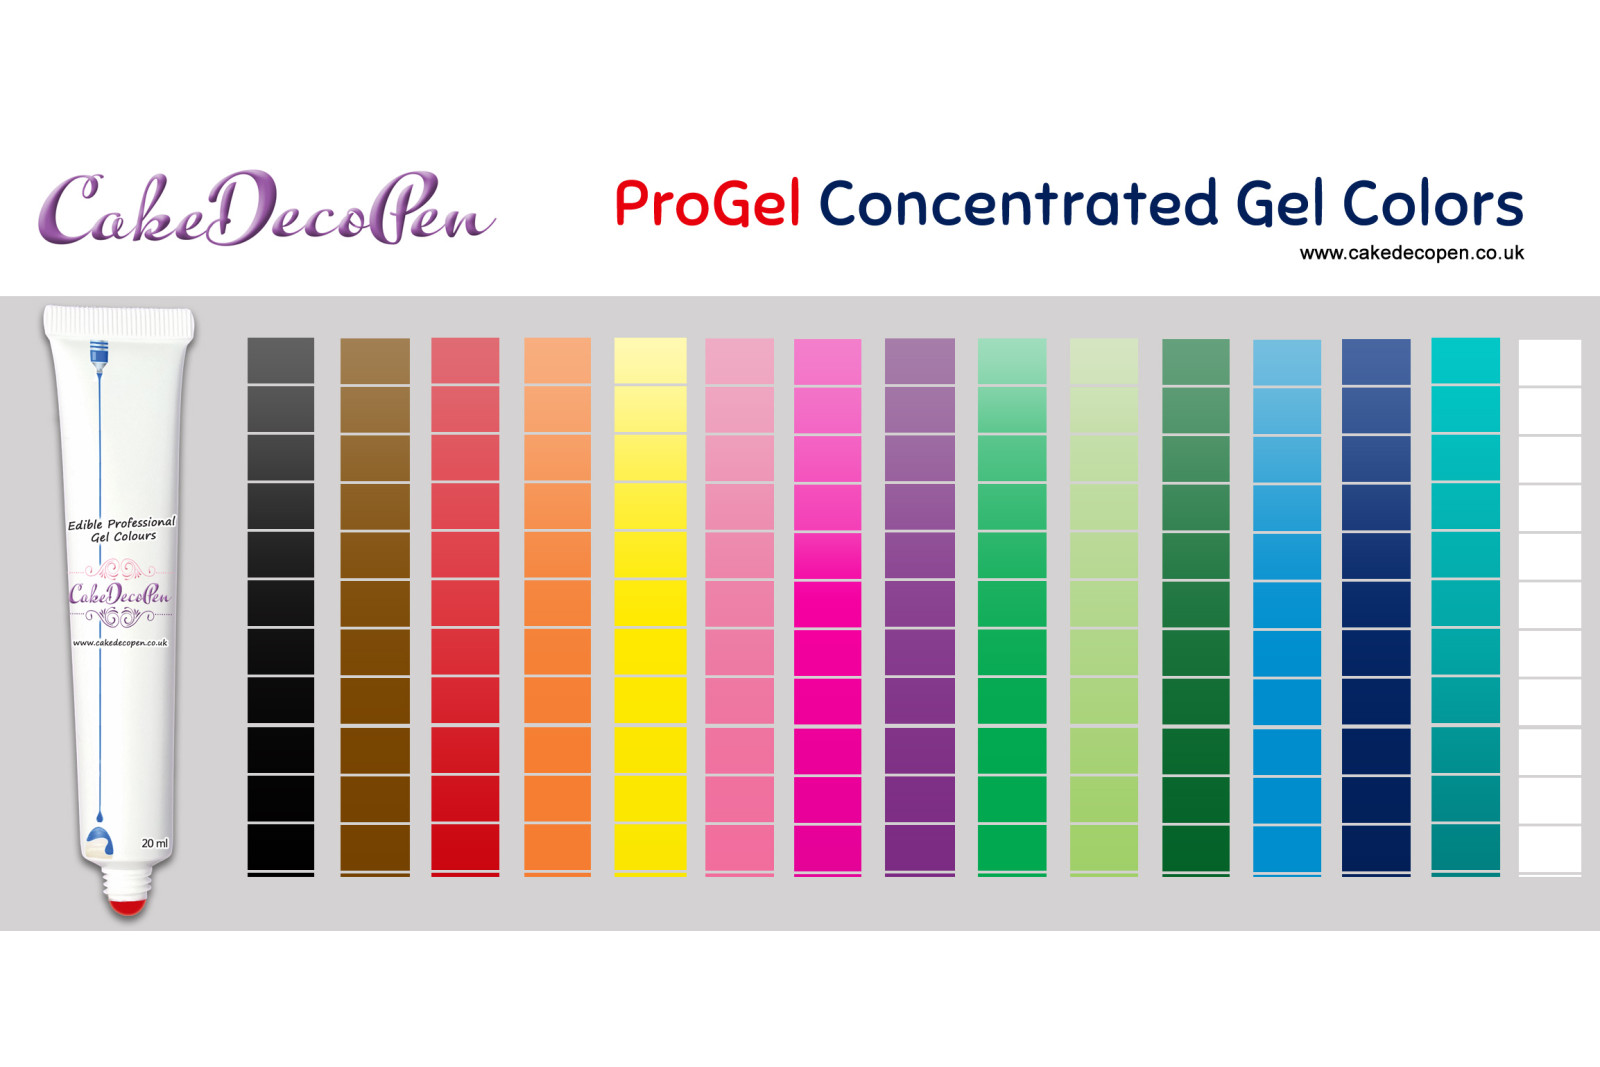 Red | Gel Food Colors | Concentrated ProGel | Cake Decorating | 30 ML | Christmas Edible Decorating Colours